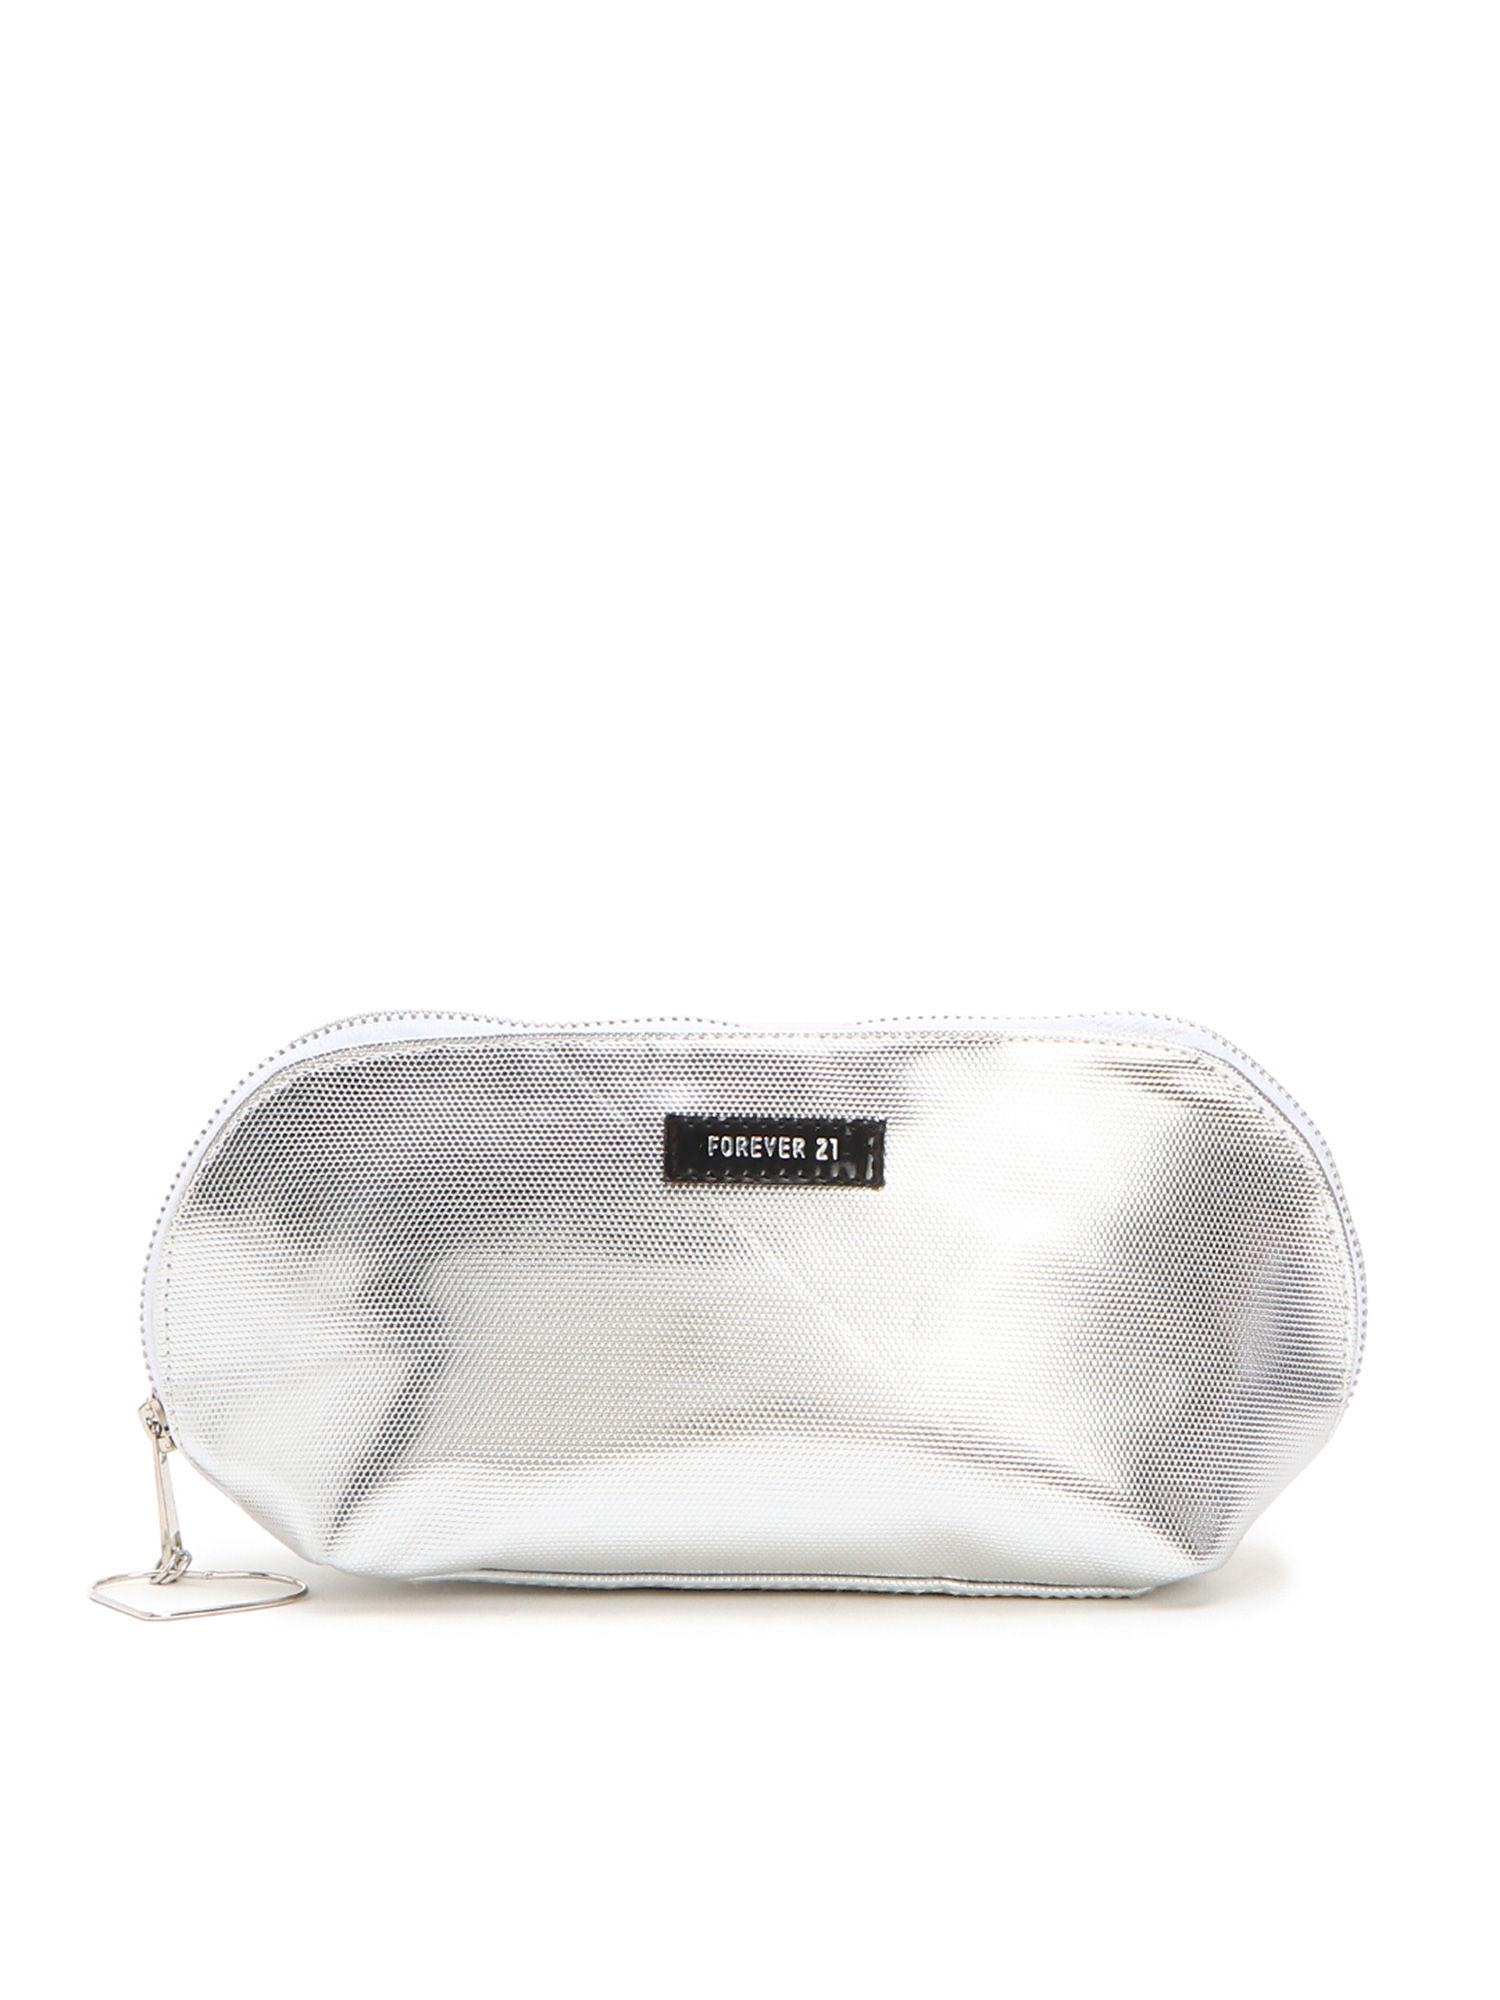 silver pouch